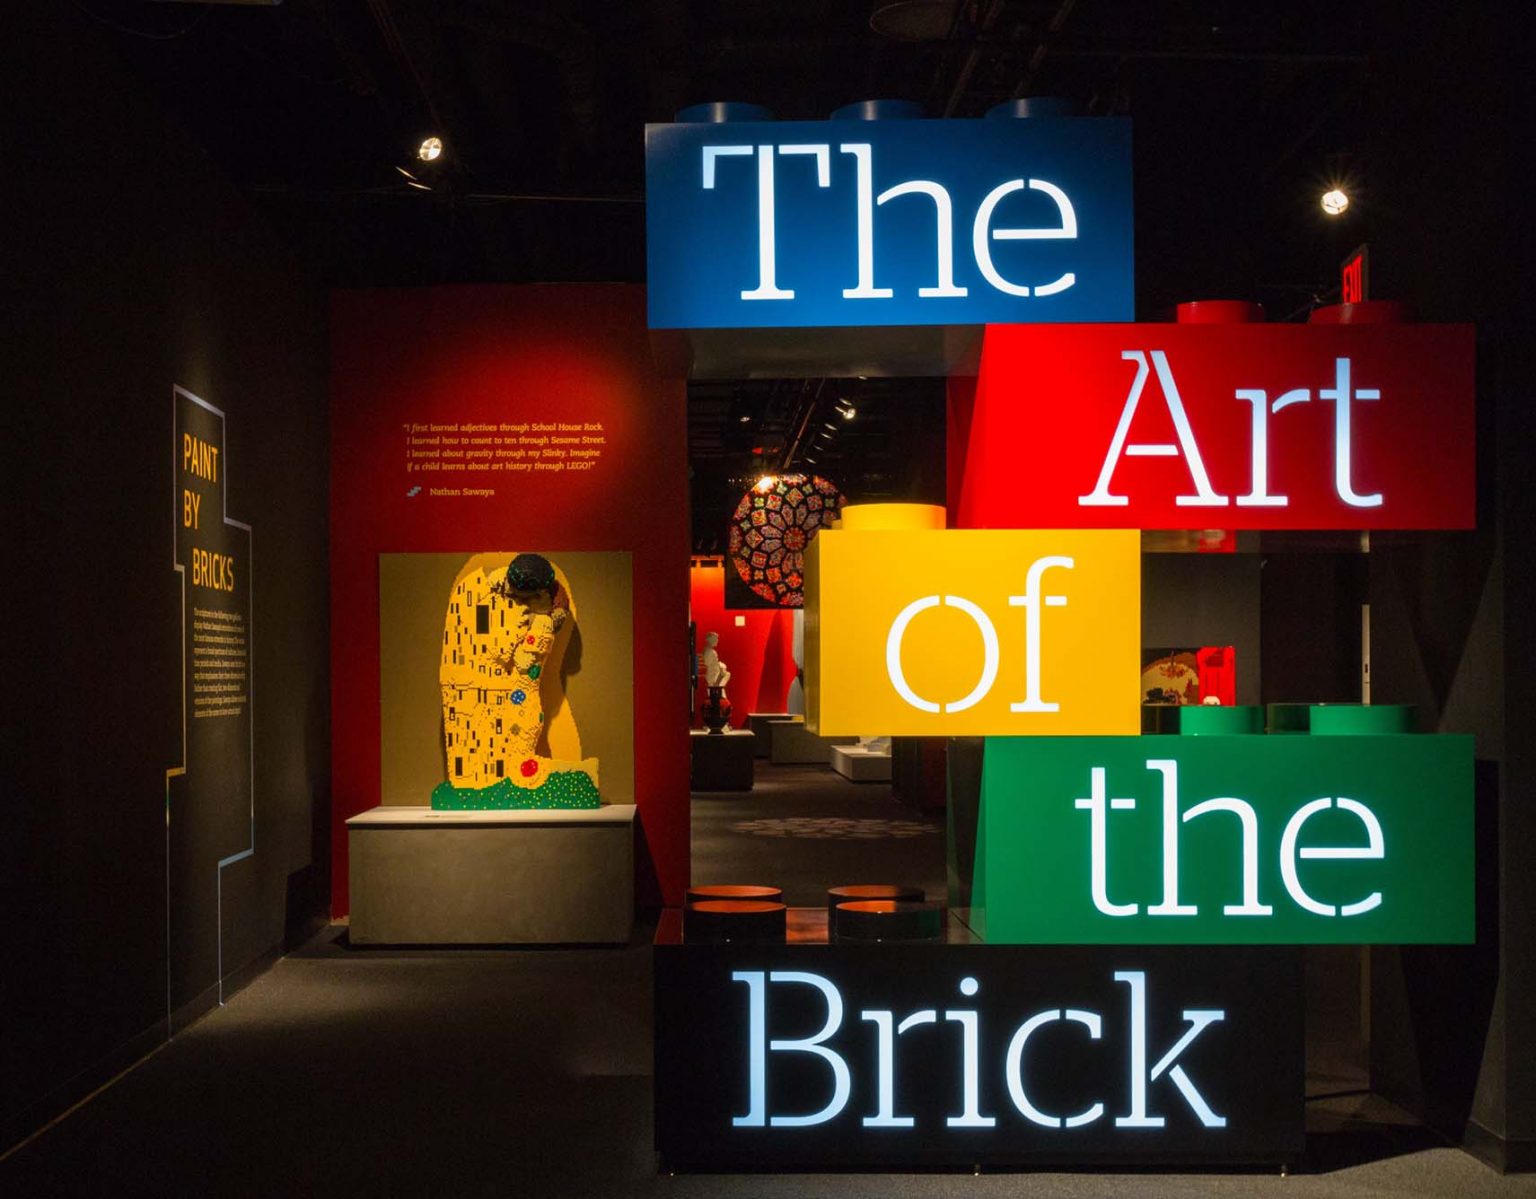 'The Art of the Brick' Exhibition, Komplex Exhibition Hall Budapest, 9 January